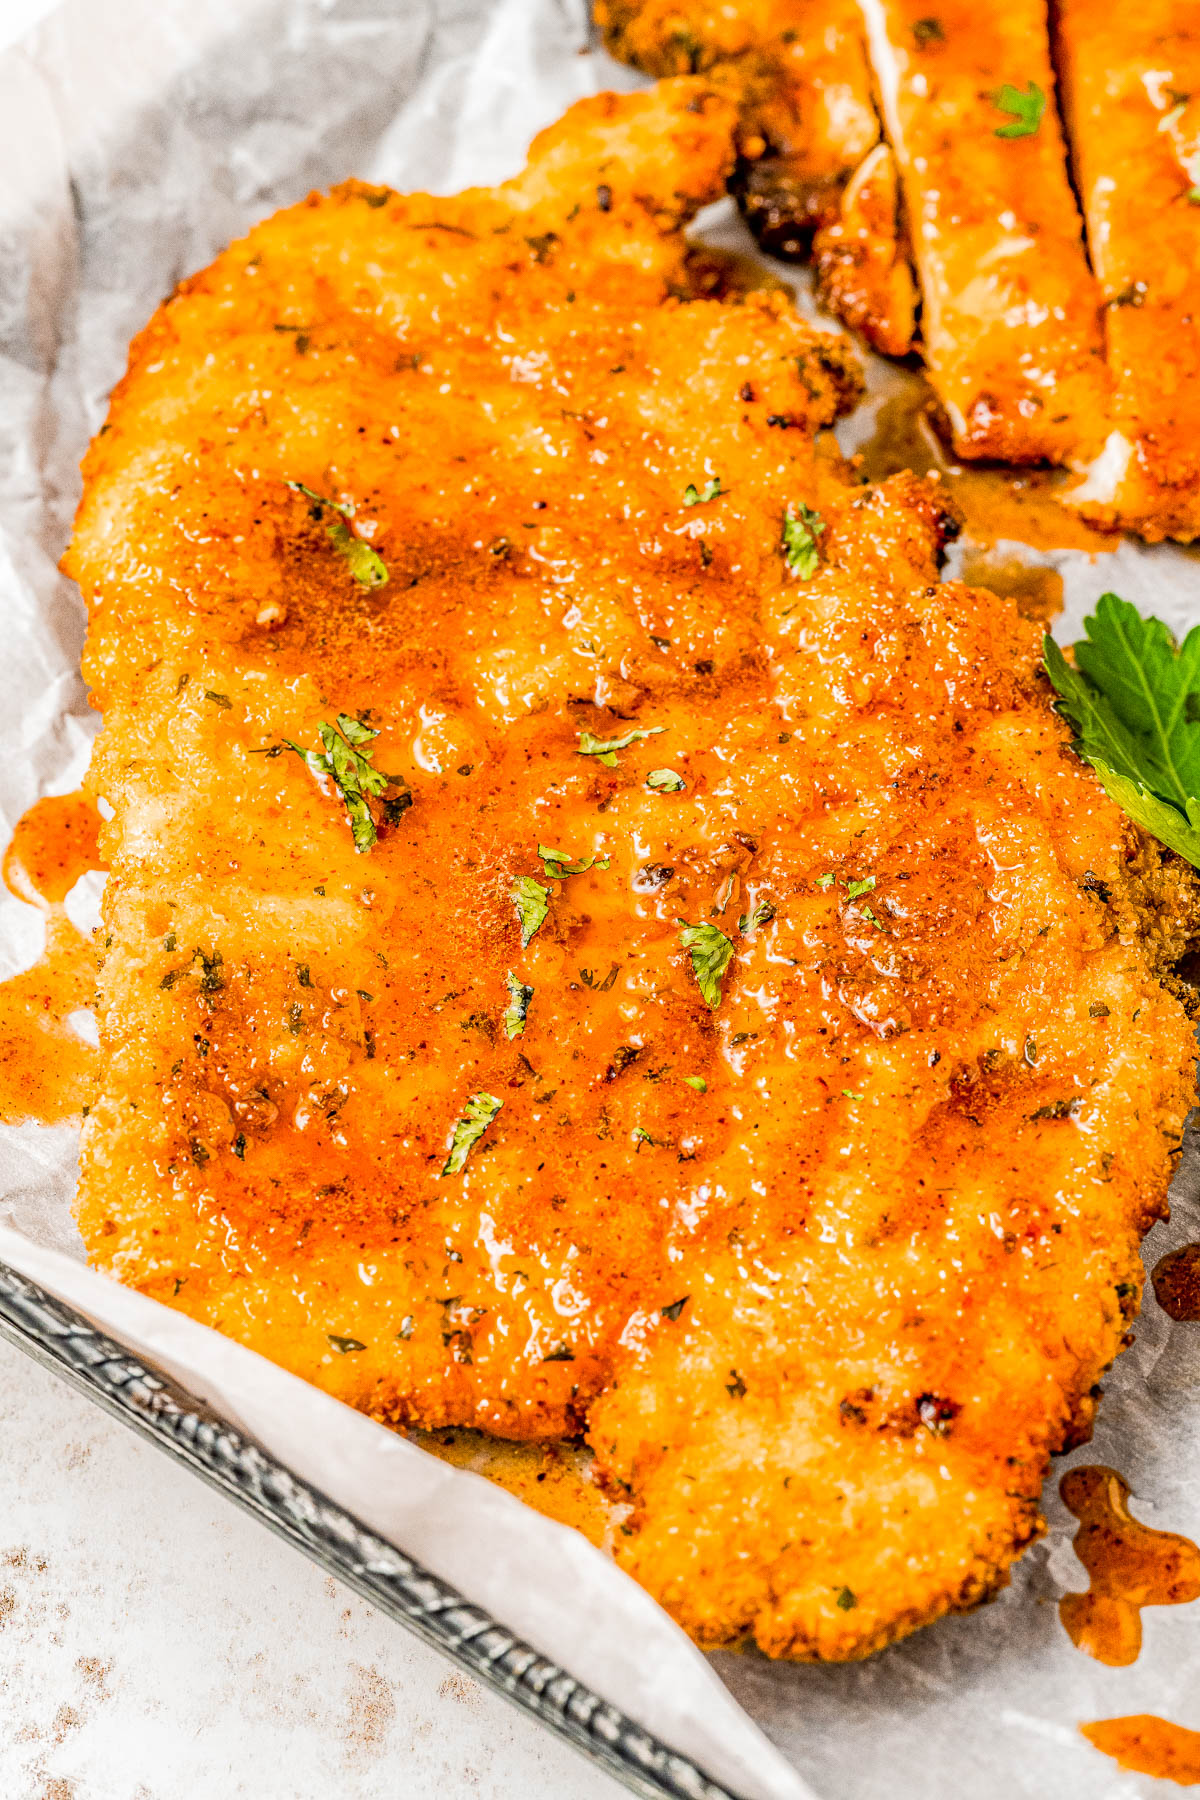 Air Fryer Hot Honey Chicken — Breaded chicken cutlets are air fried until crispy, then drizzled with spicy-sweet hot honey! This is such a QUICK and EASY air fryer chicken recipe that takes less than 30 minutes to prepare! Oven-baking instructions are also provided.